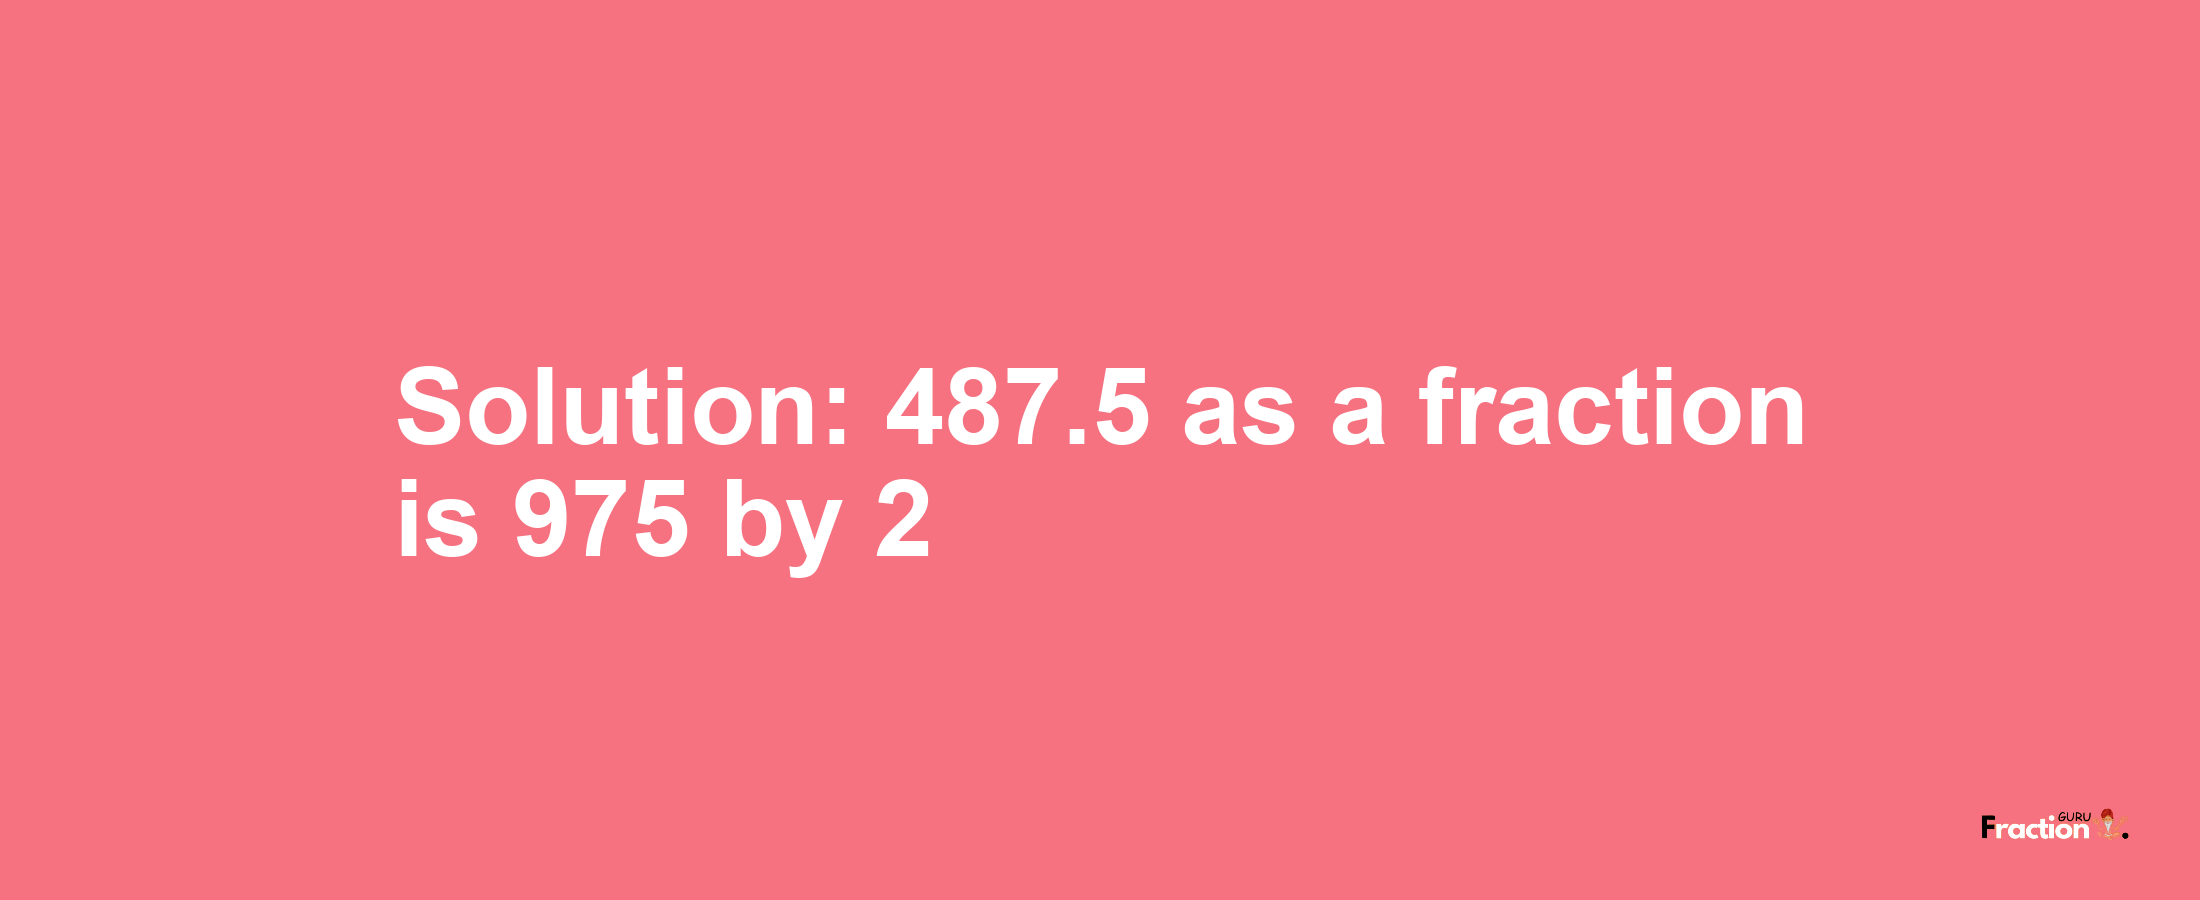 Solution:487.5 as a fraction is 975/2